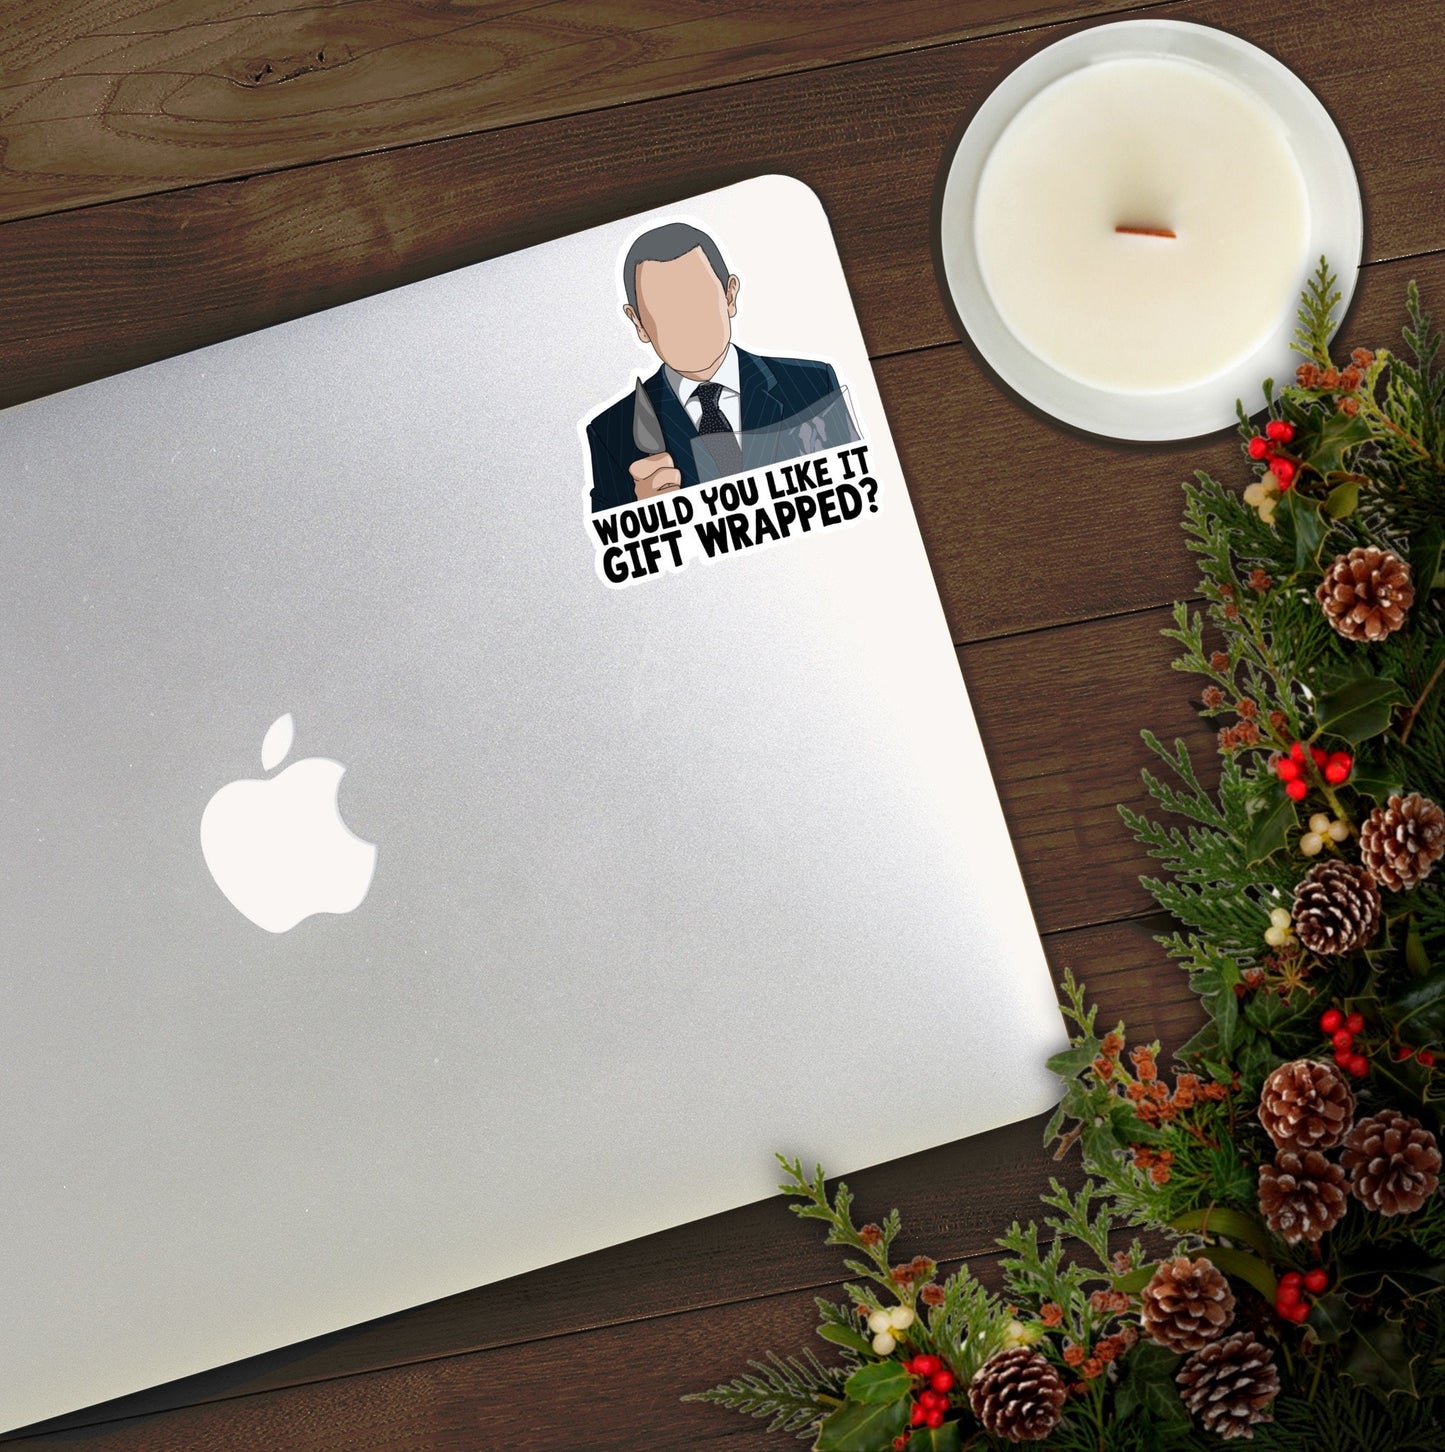 Would You Like It Gift Wrapped? | Love Actually Stickers